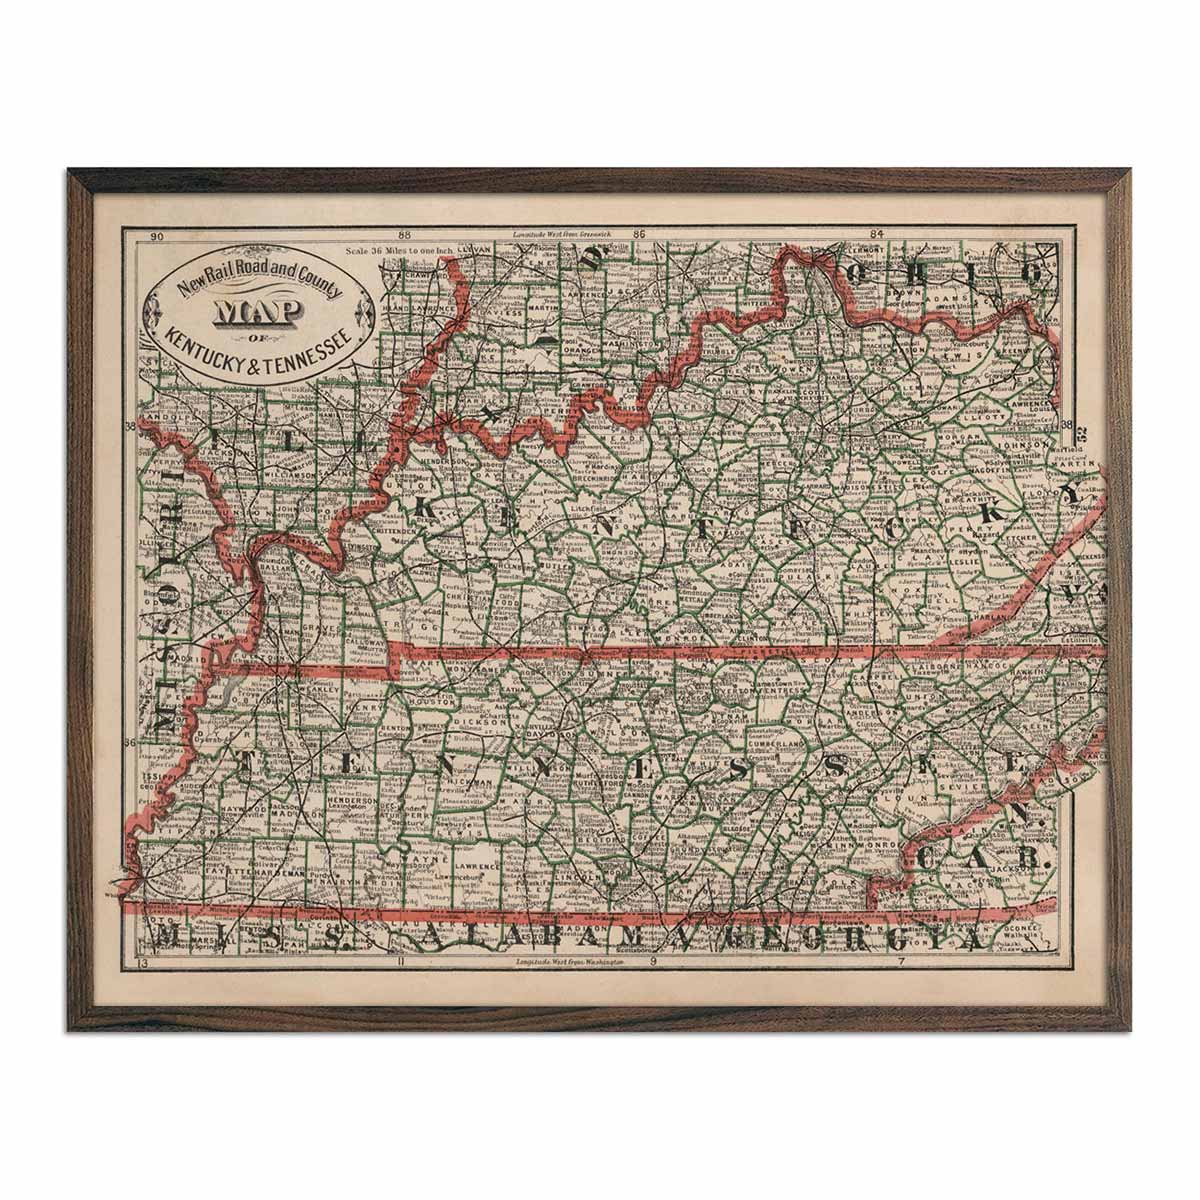 Vintage Map of Kentucky and Tennessee 1883